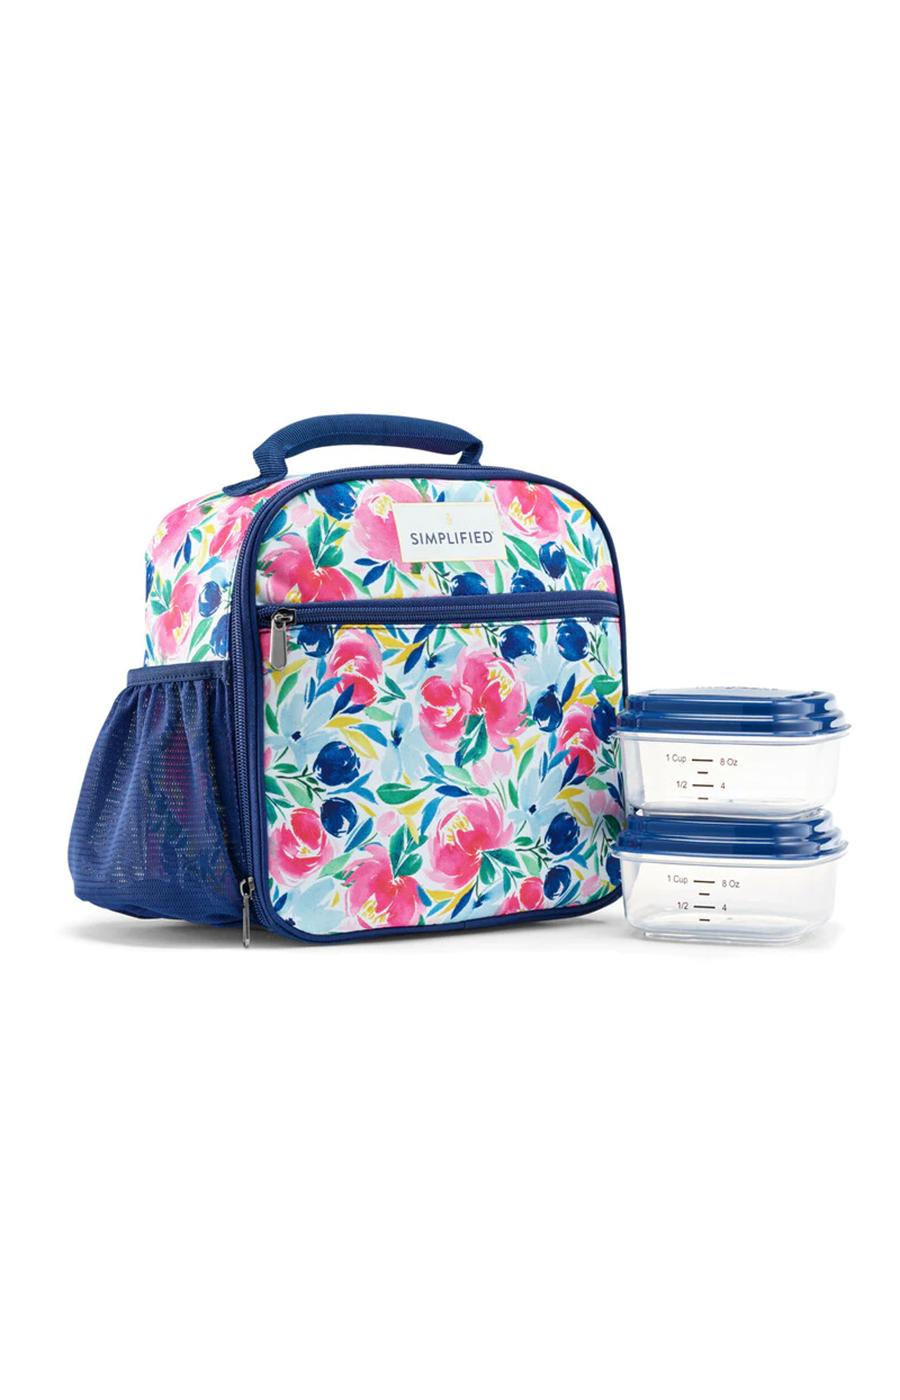 Fit + Fresh Simplified Townsend Lunch Bag Kit - Floral; image 2 of 3